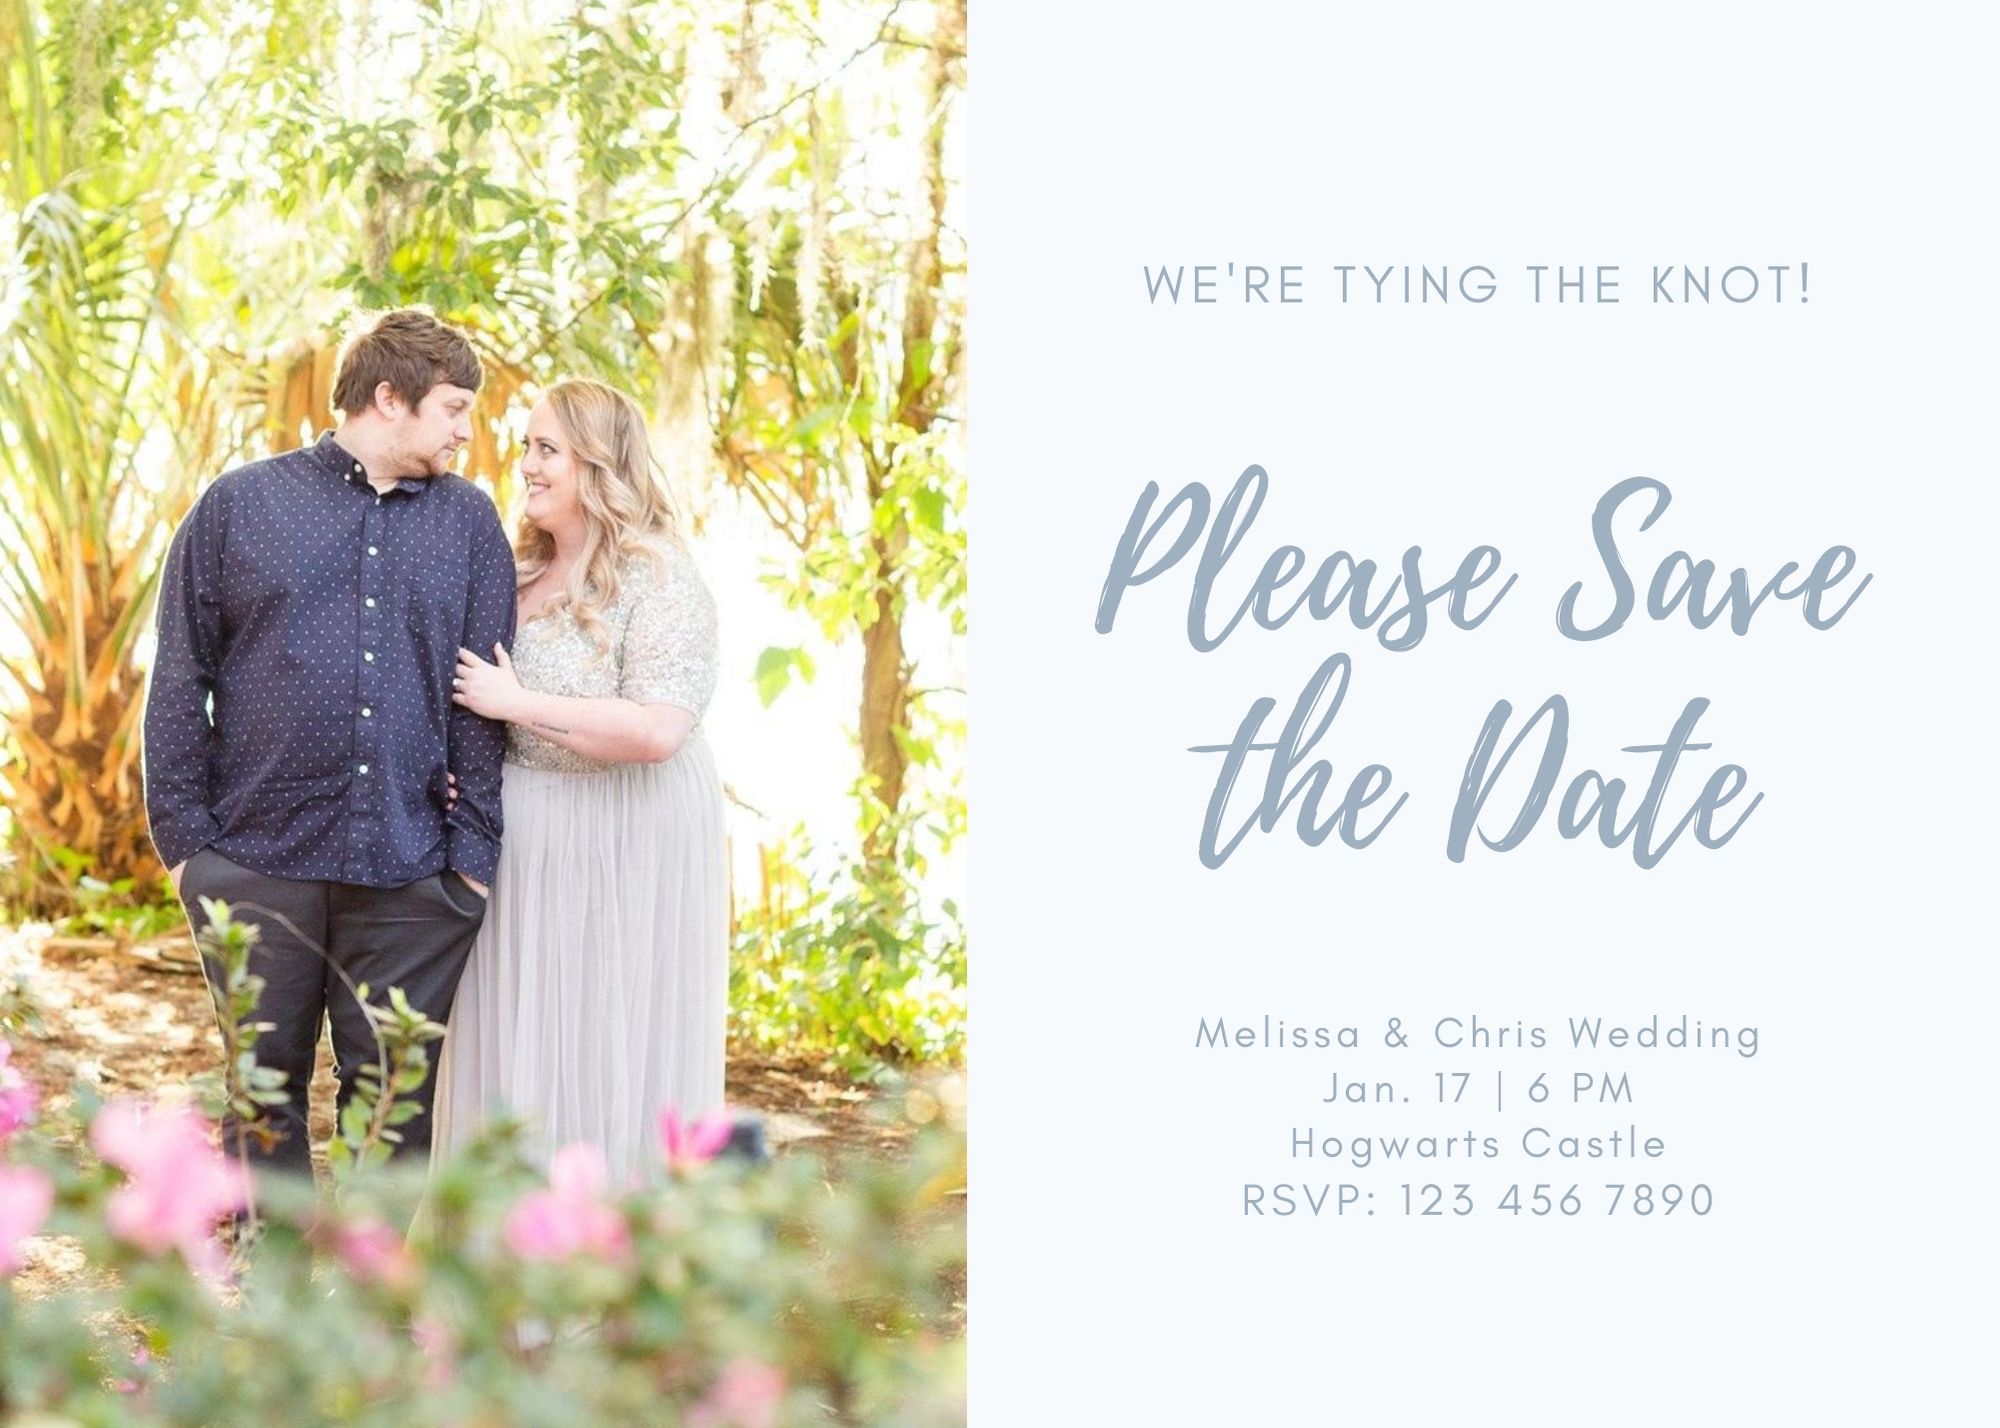 save the dated design with an engagement photo and text that says we're tying the knot, please save the date